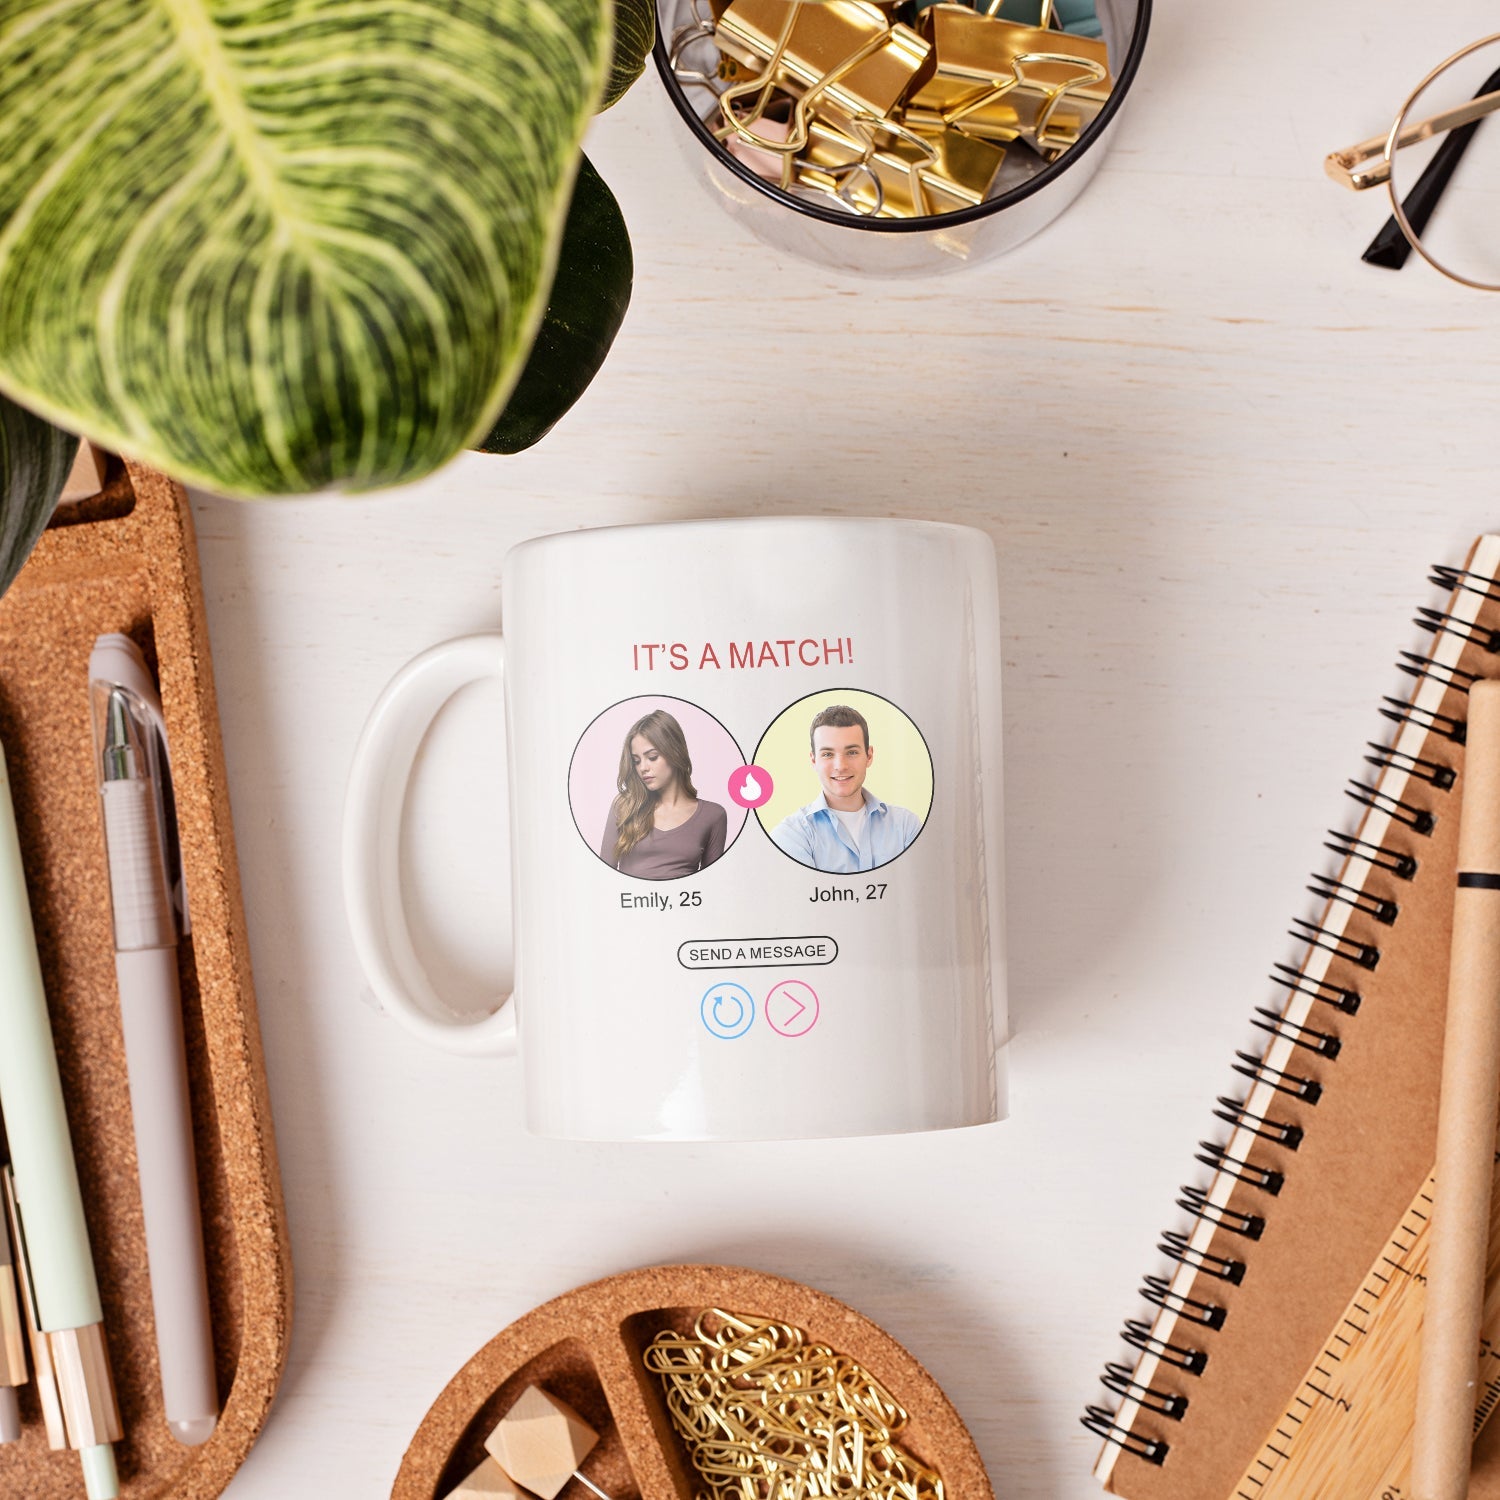 It's A Match - Personalized Anniversary, Valentine's Day gift for Online Dating Couple - Custom Mug - MyMindfulGifts